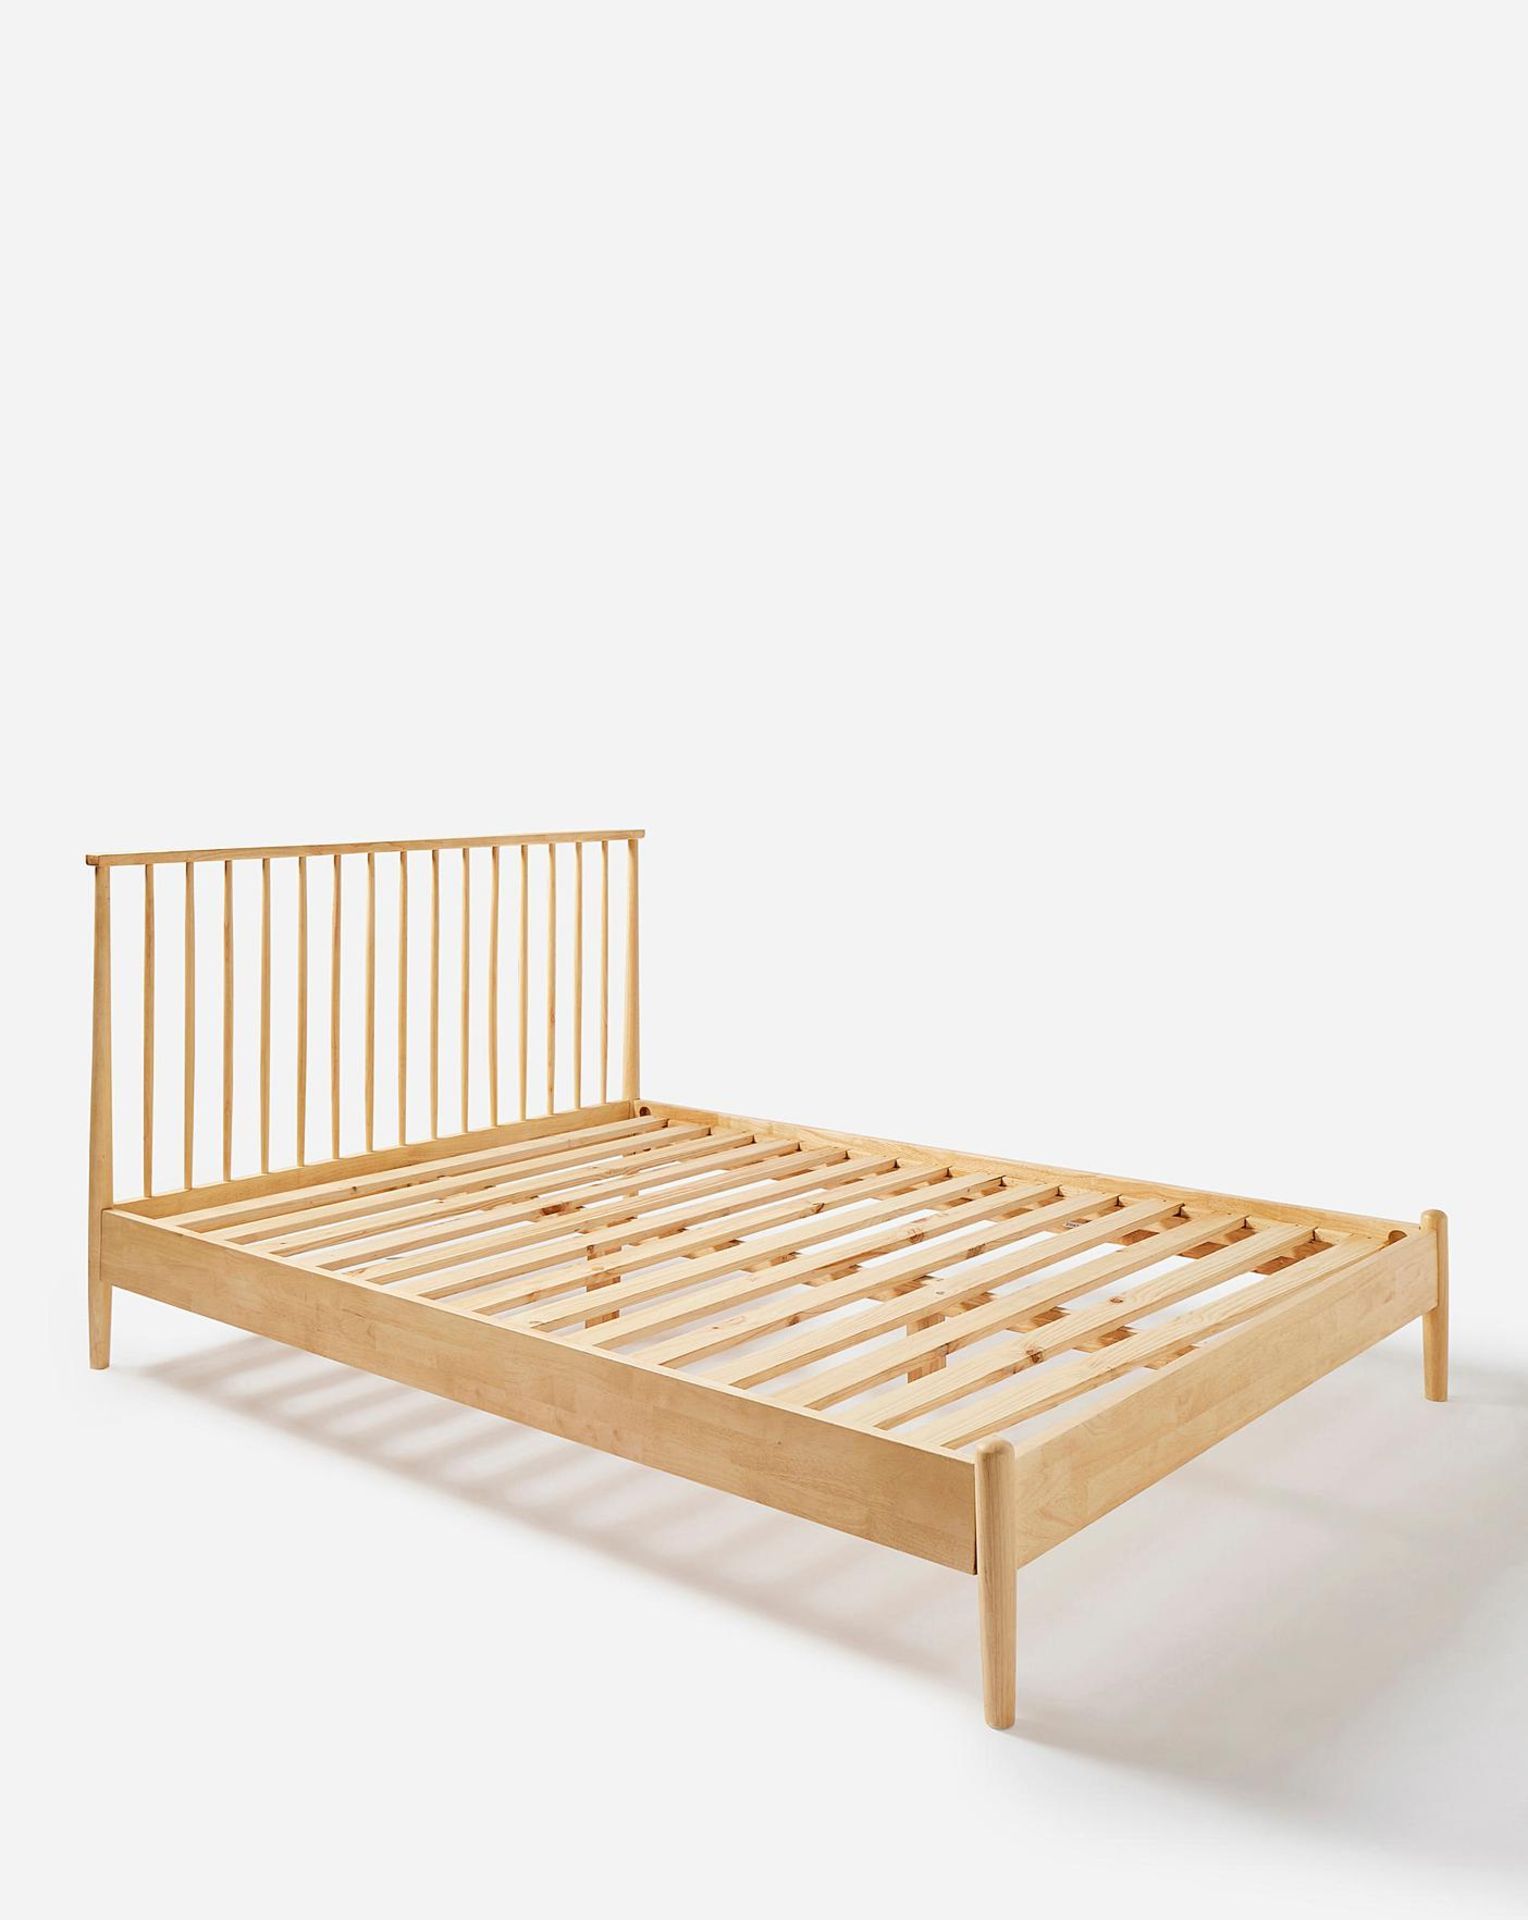 NEW & BOXED JULIPA Erika Wooden Spindle DOUBLE Bed Frame. LIGHT WOOD. RRP £649. EACH. Part of the - Bild 3 aus 3